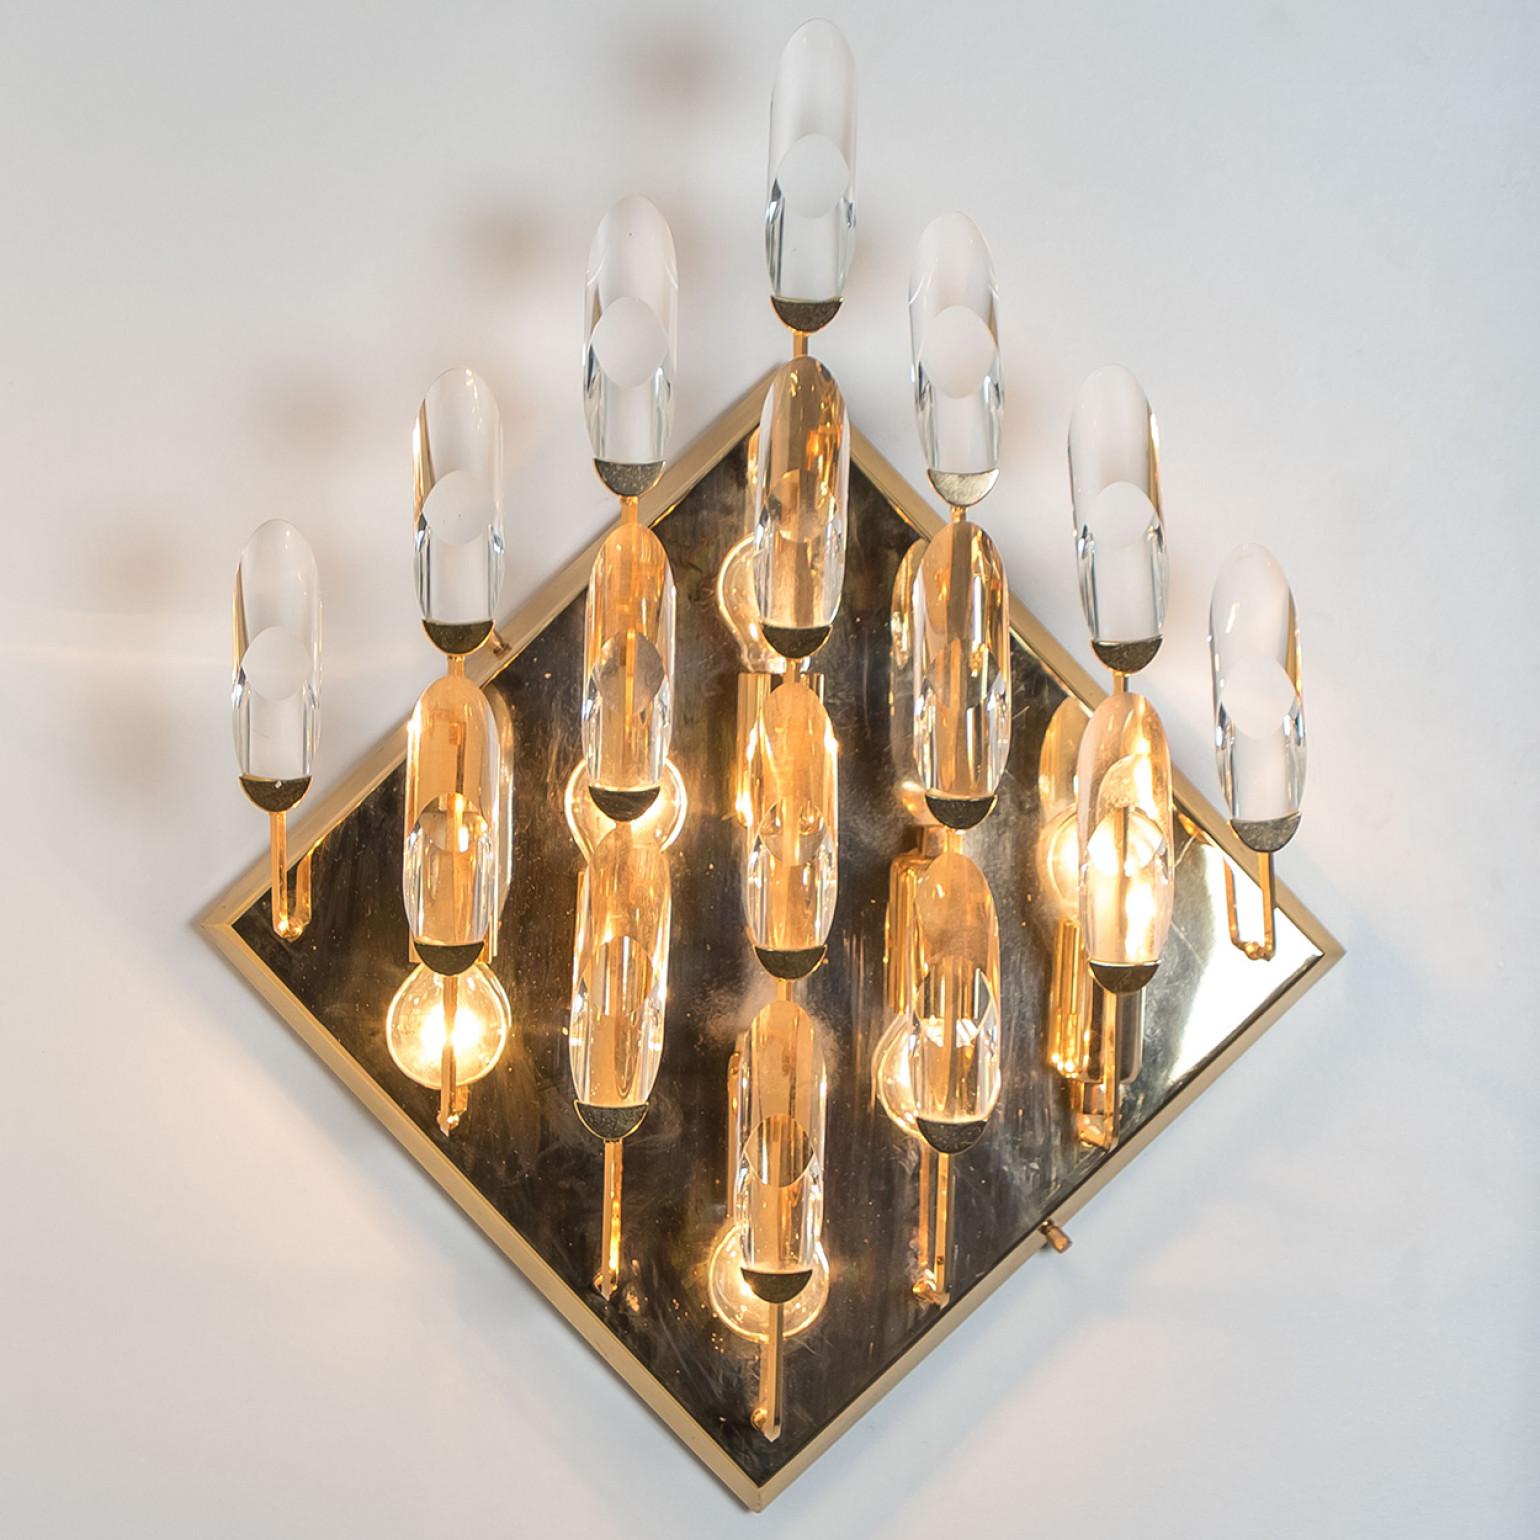 High-end gilded brass wall light by Stilkronen, made in Italy, circa 1975. Each fixture is featuring a weave-like array of branches holding clear crystal droplet-pieces. The crystals refract light beautifully and are perfect for a soft, warm and